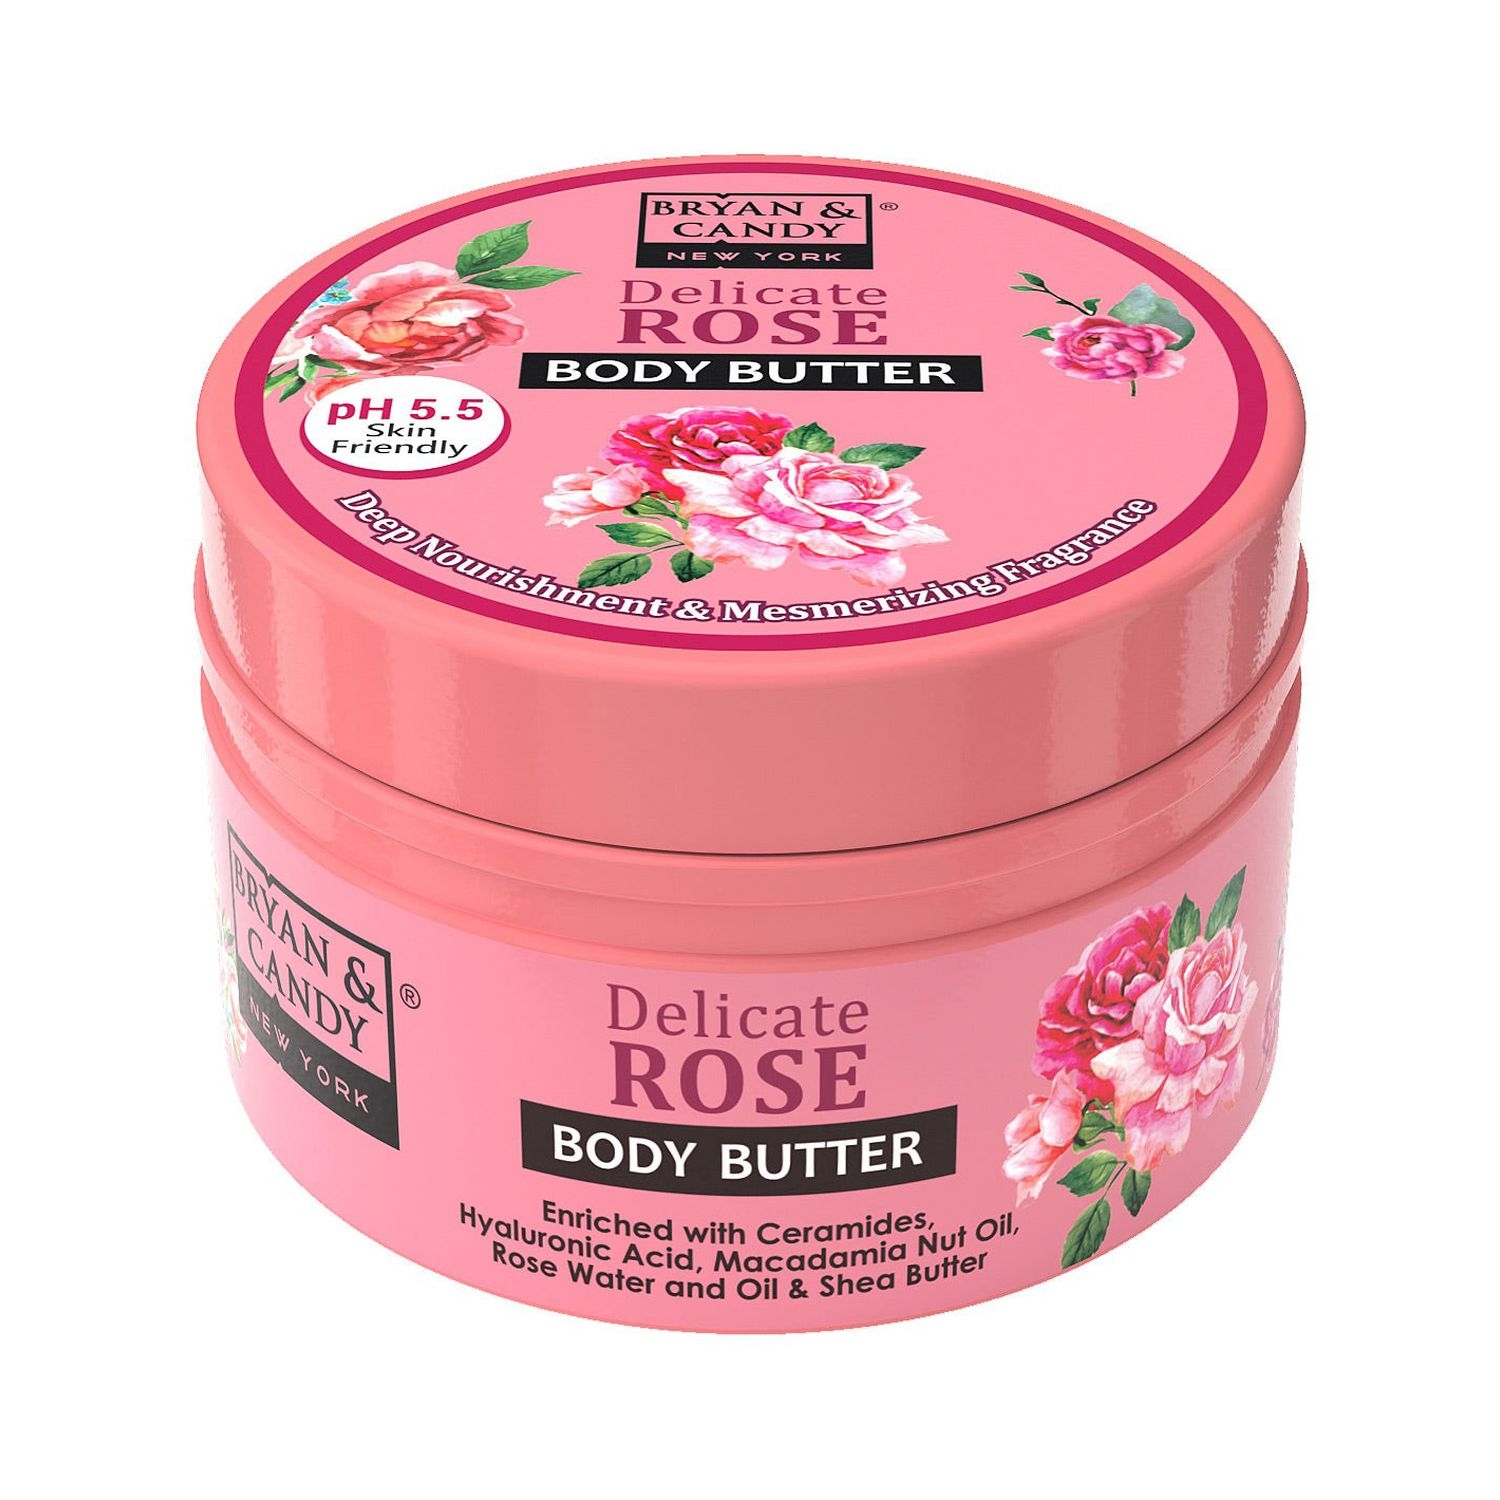 BRYAN & CANDY Delicate Rose Body Butter (200g)